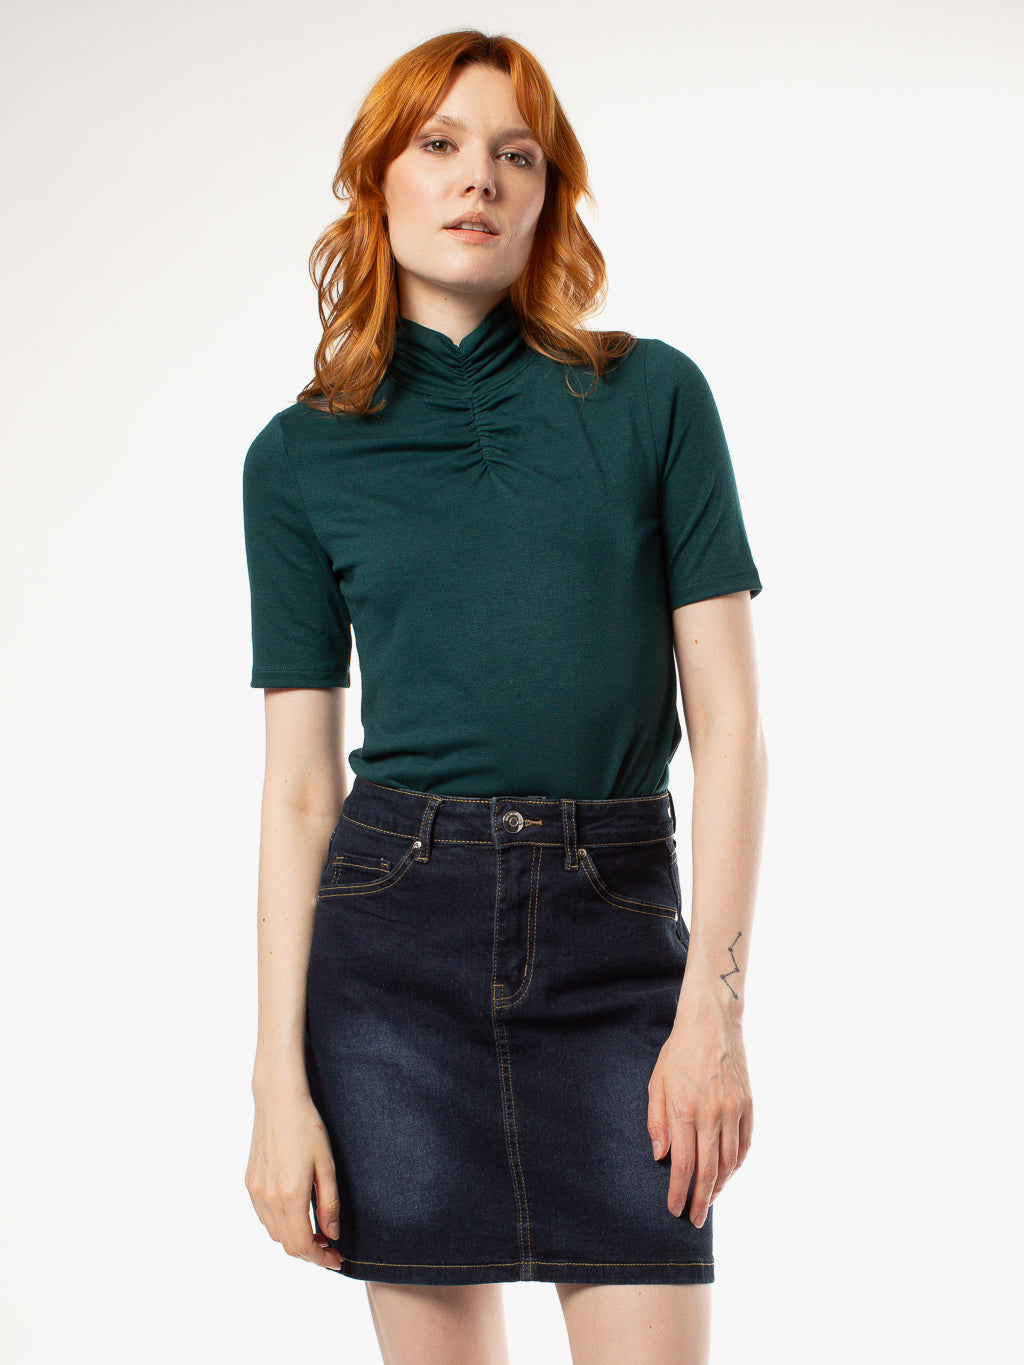 Turtle neck t-shirt with pleated details